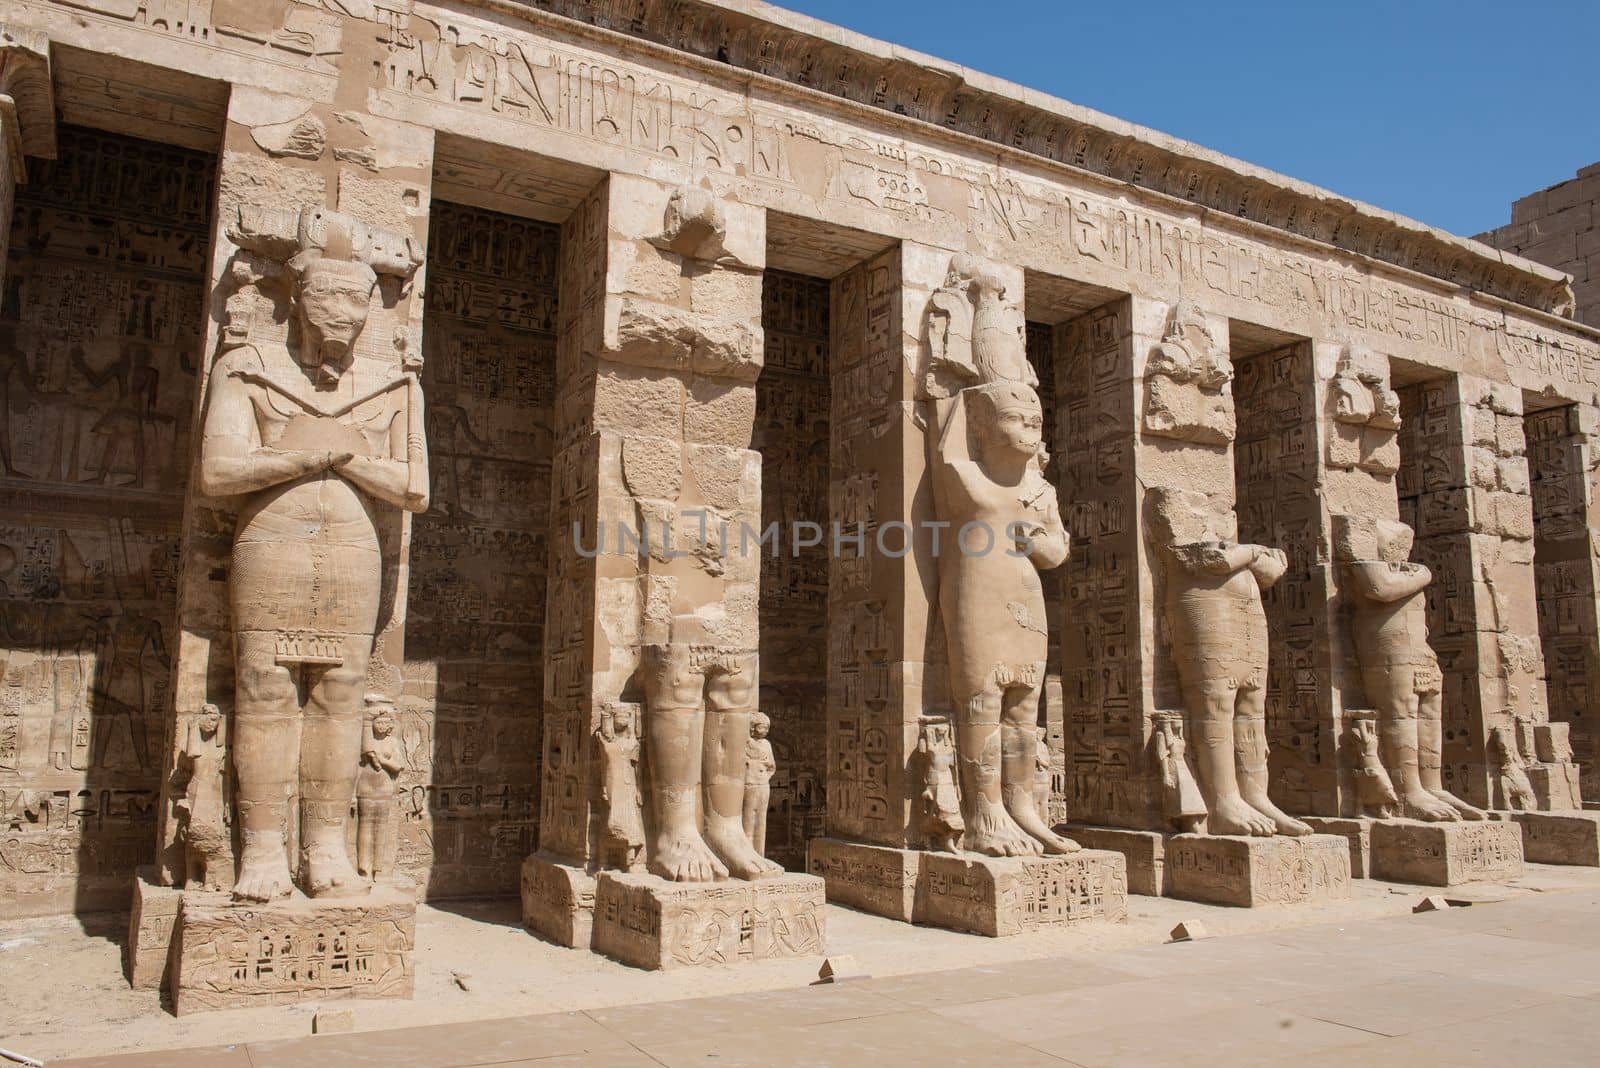 Large statues of Ramses 2nd at Medinat Habu temple in Egypt by paulvinten